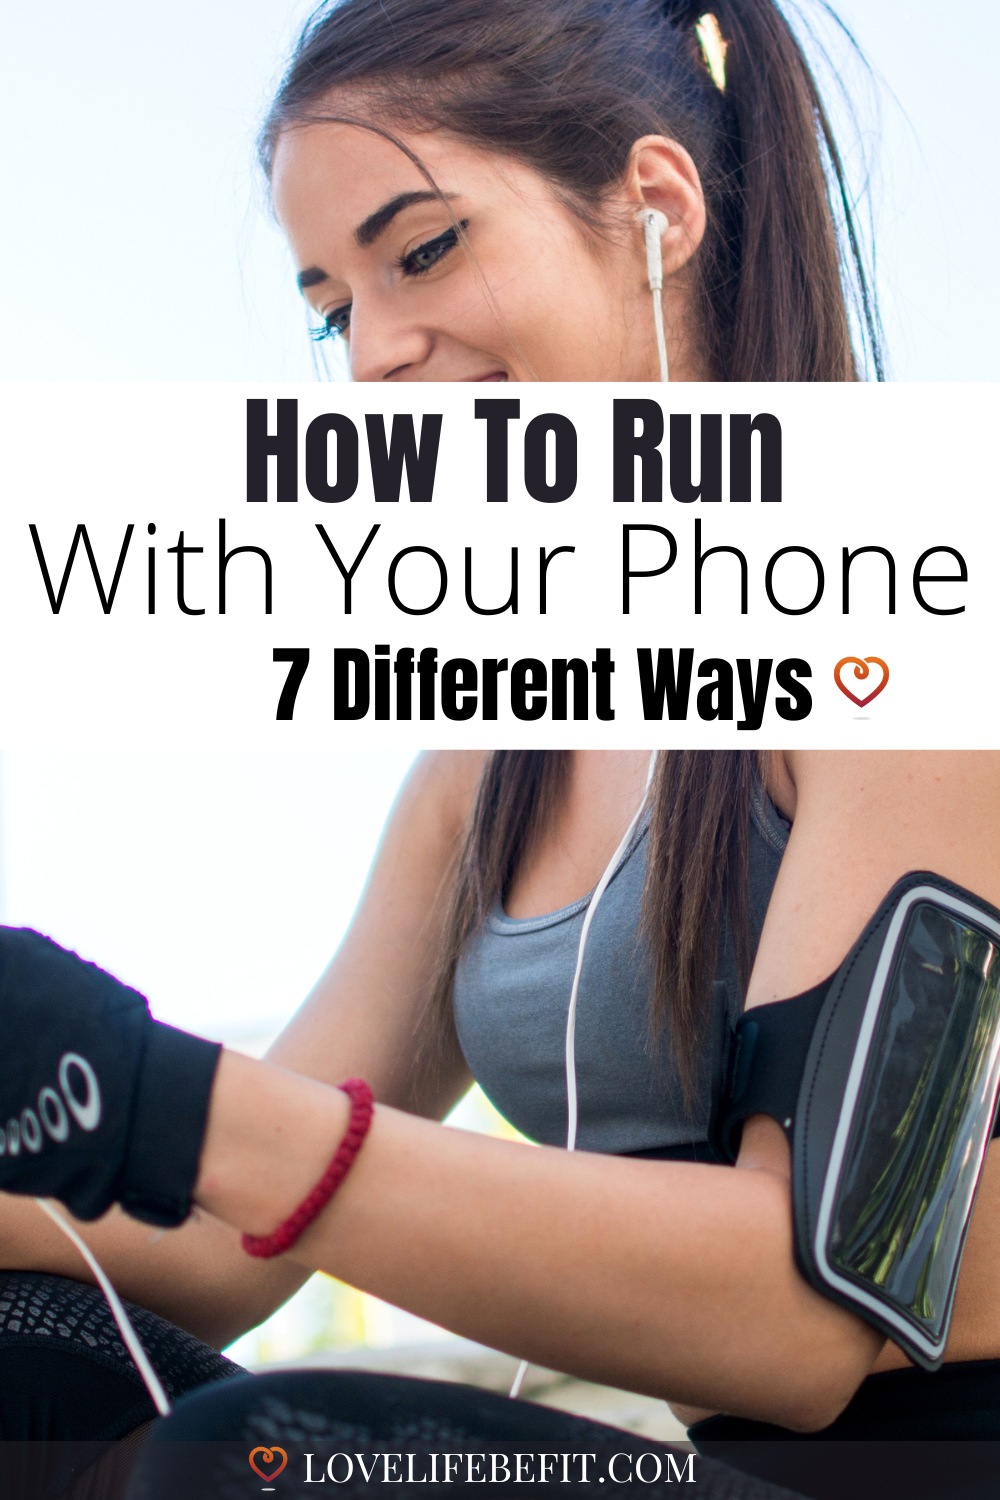 How to run with your phone